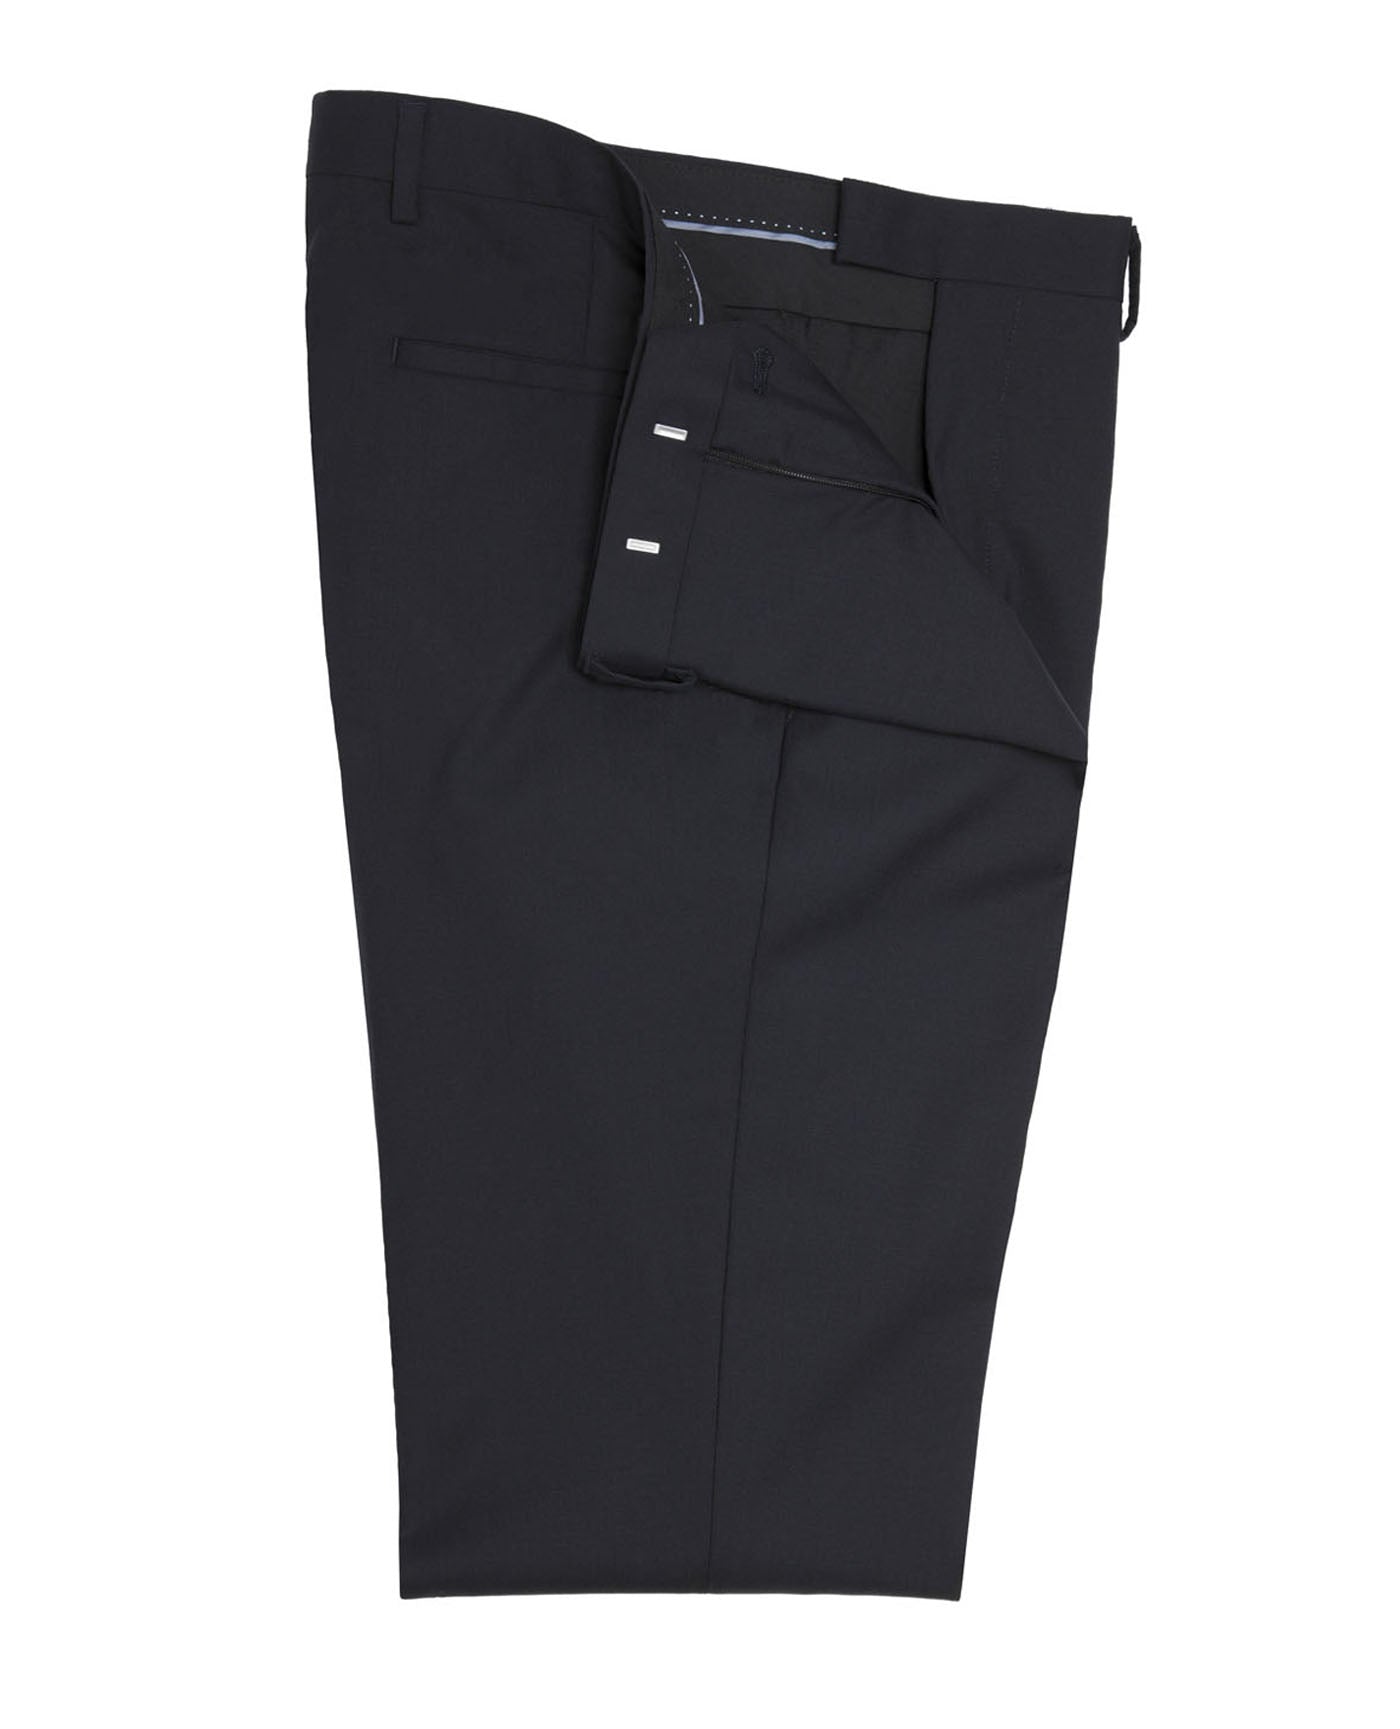 Image 1 of Flat Front Borough Trousers Plain Weave Navy